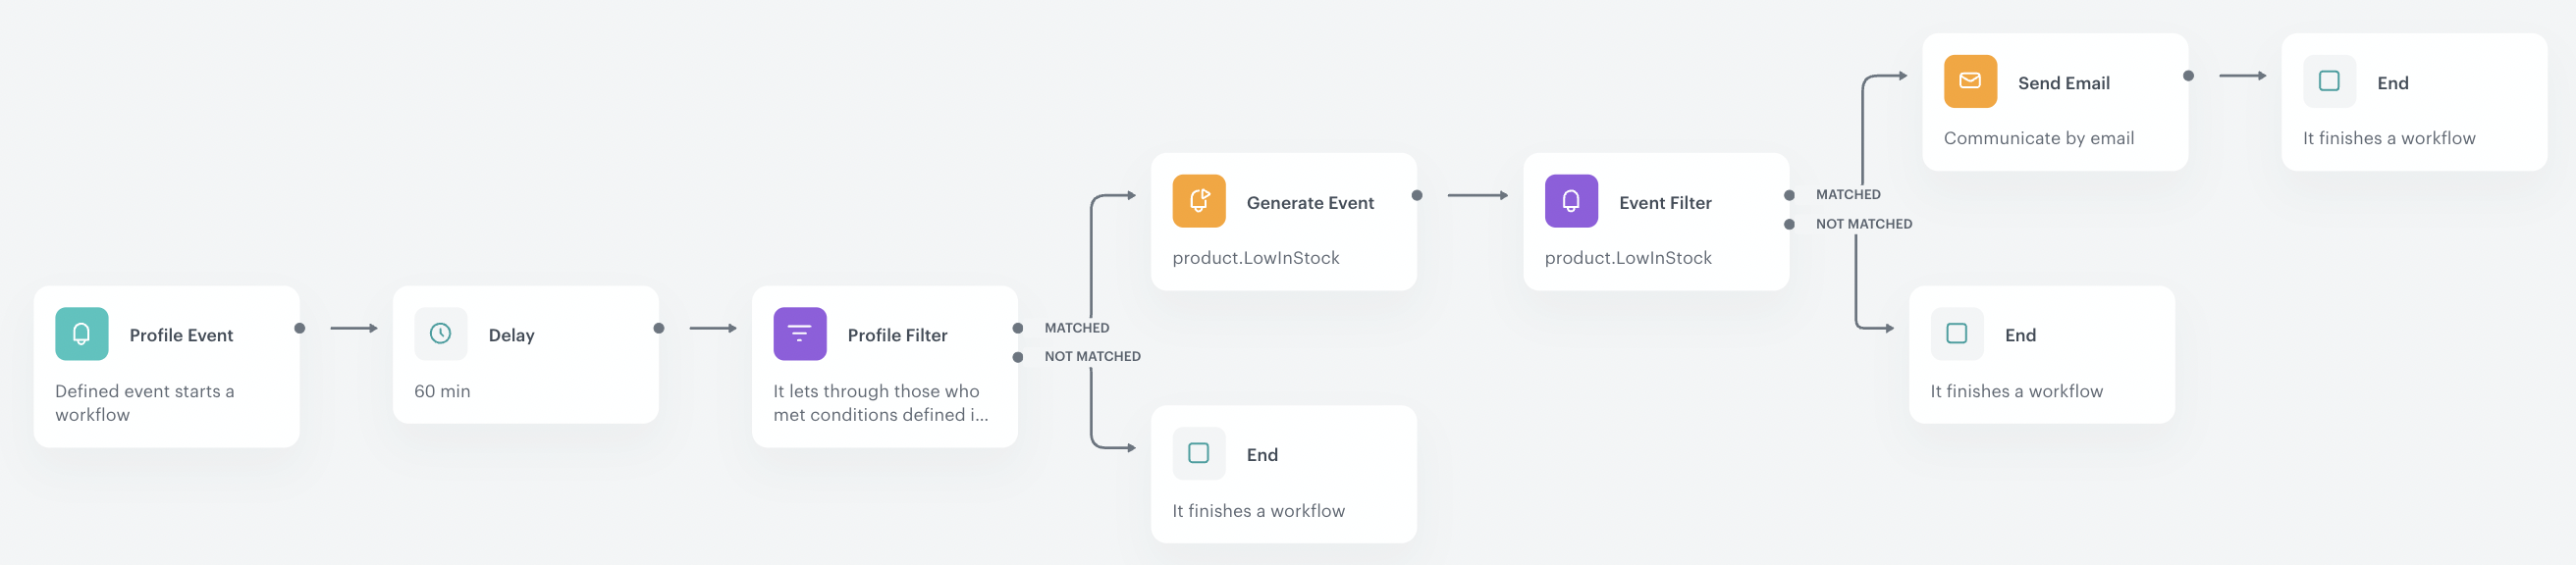 The final configuration of the workflow